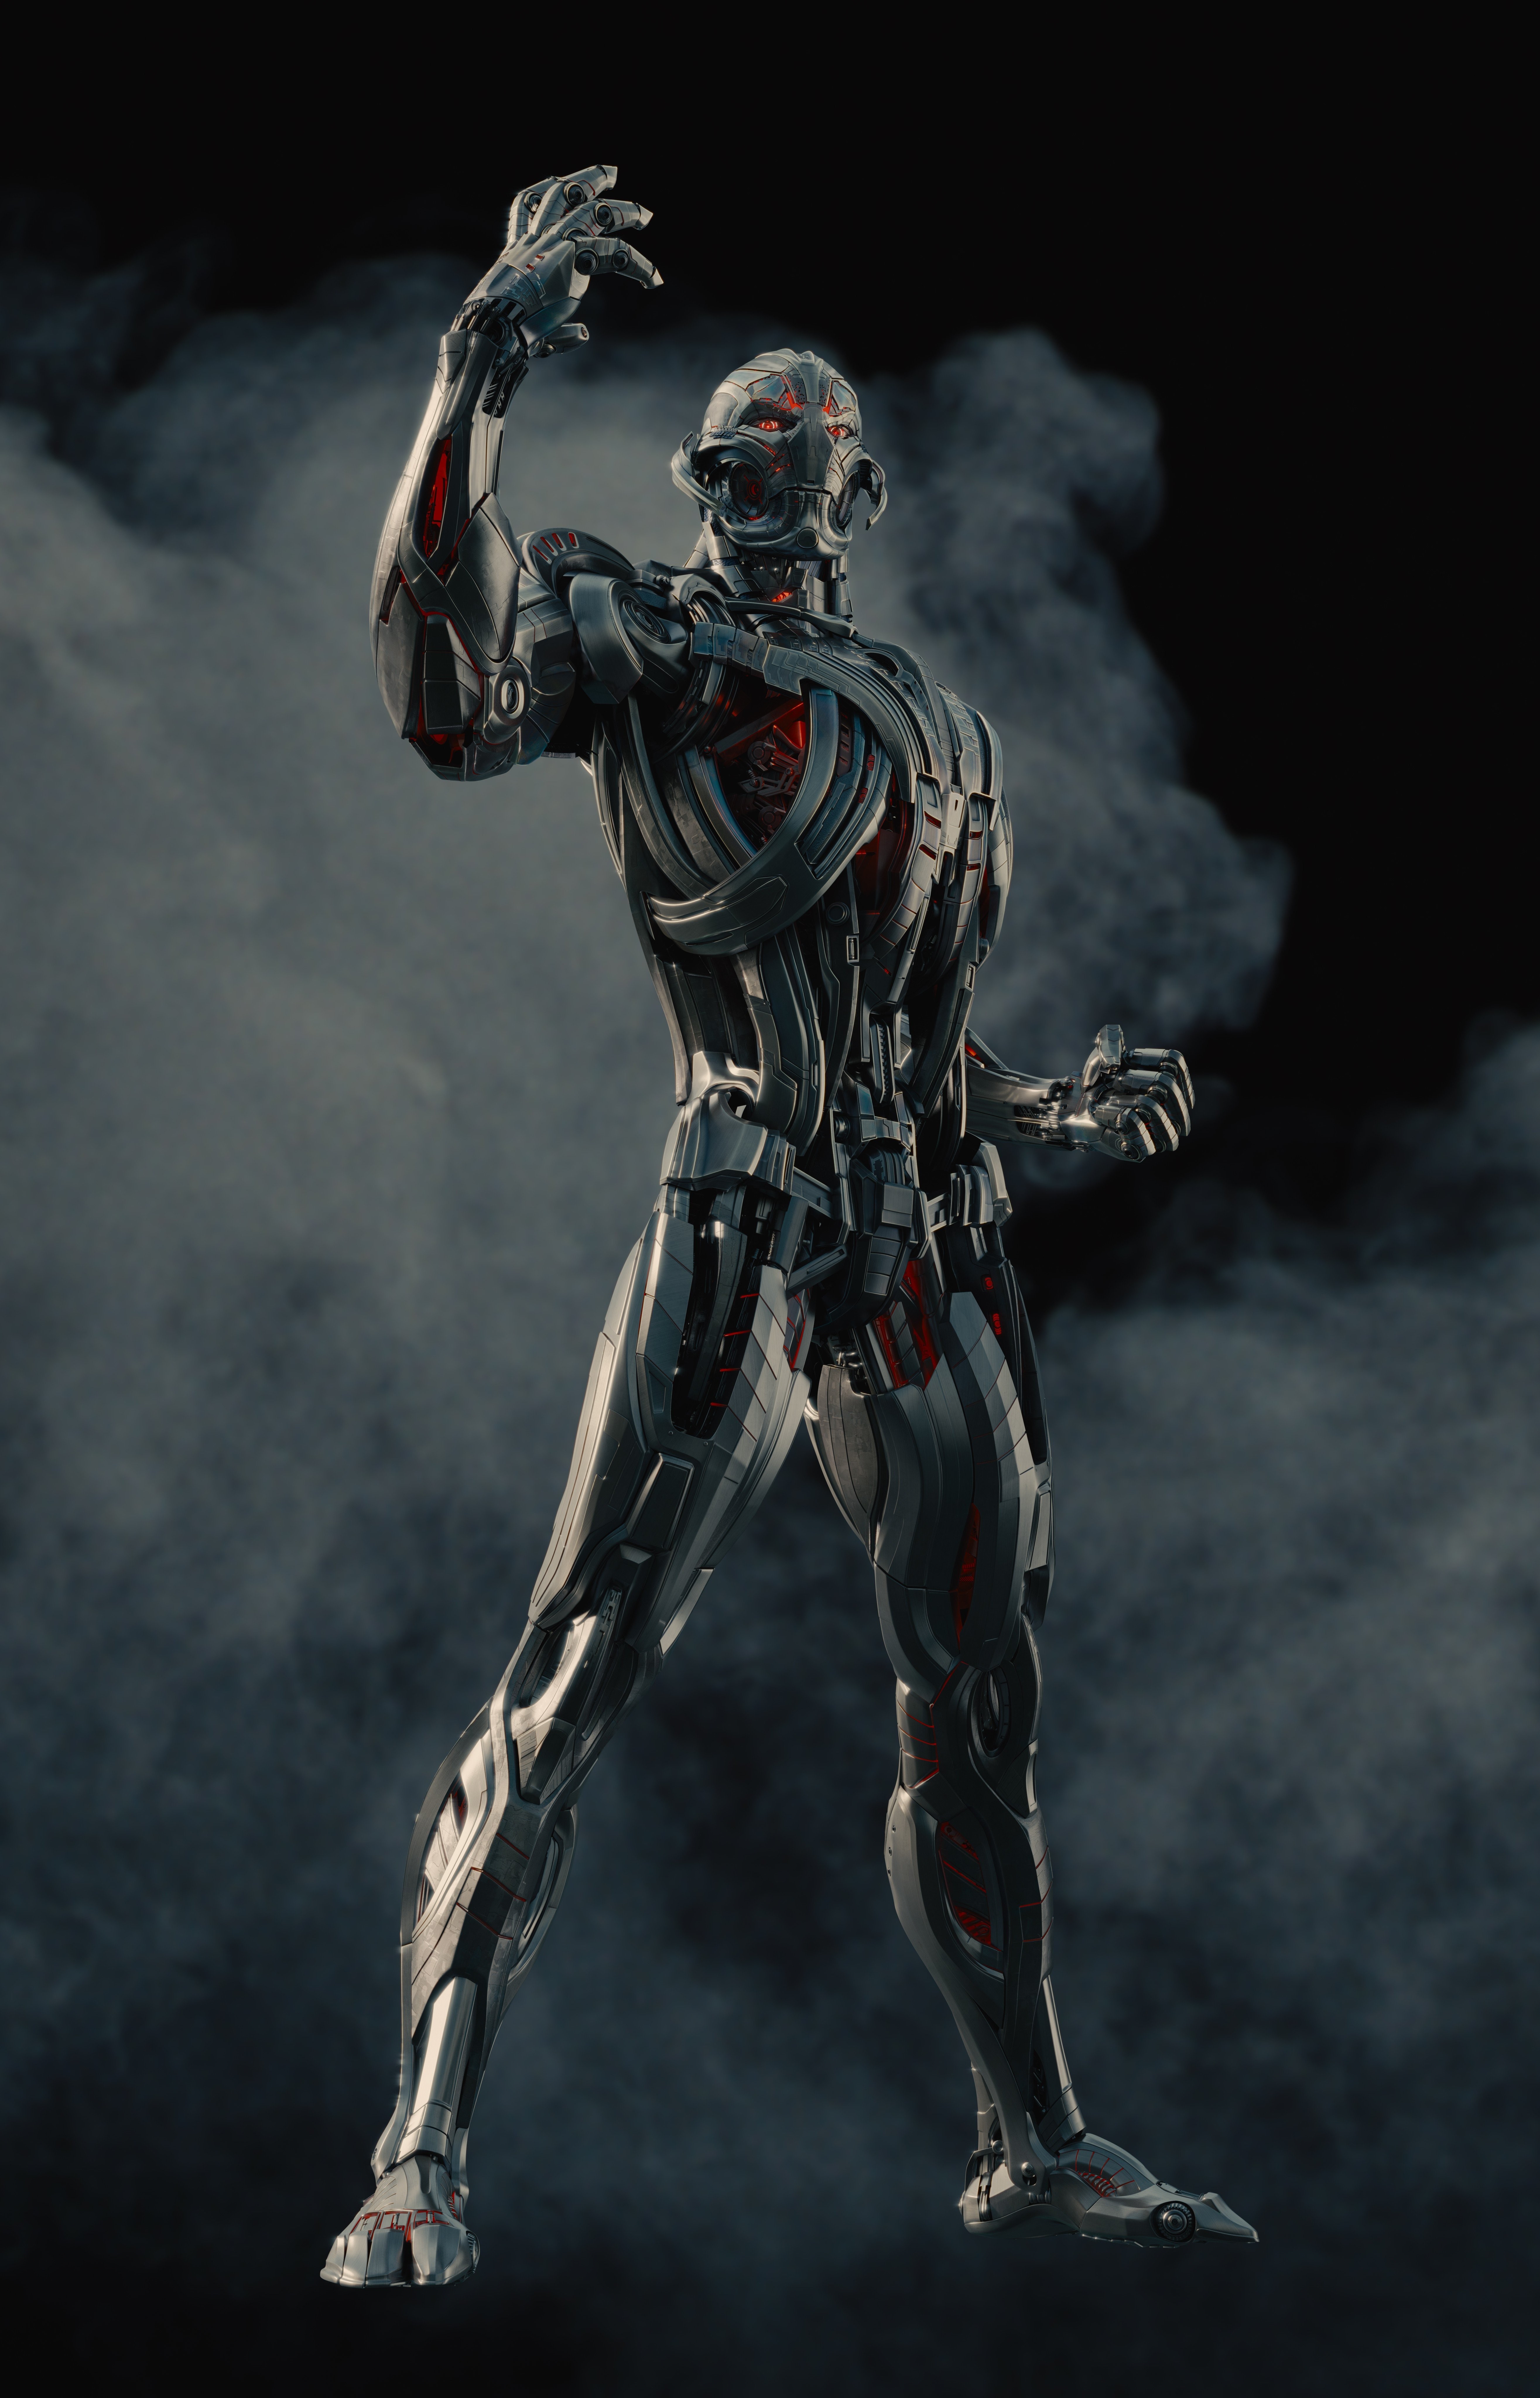 General 5260x8191 Avengers: Age of Ultron The Avengers robot Ultron Marvel Cinematic Universe movies villains